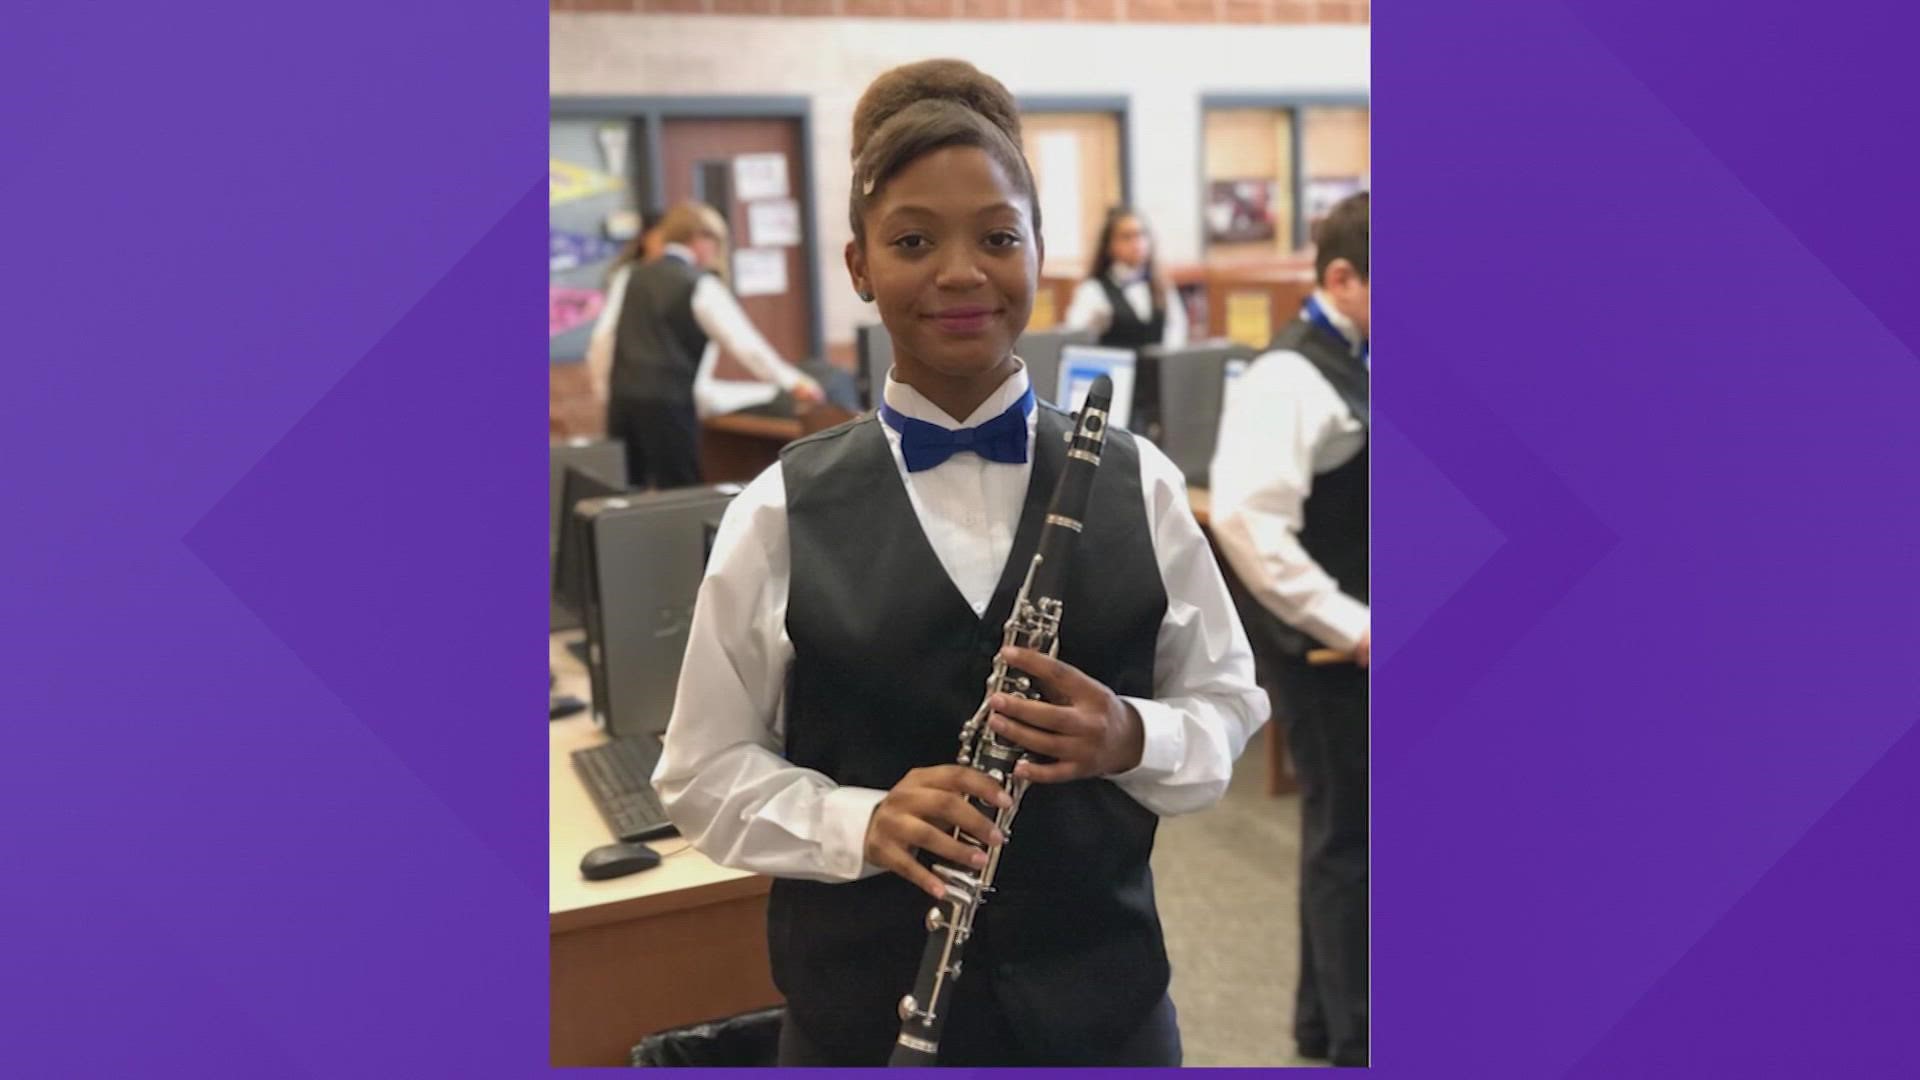 Ziyanna Jones, a member of Dickinson High School's marching band, was killed in a hit-and-run crash.